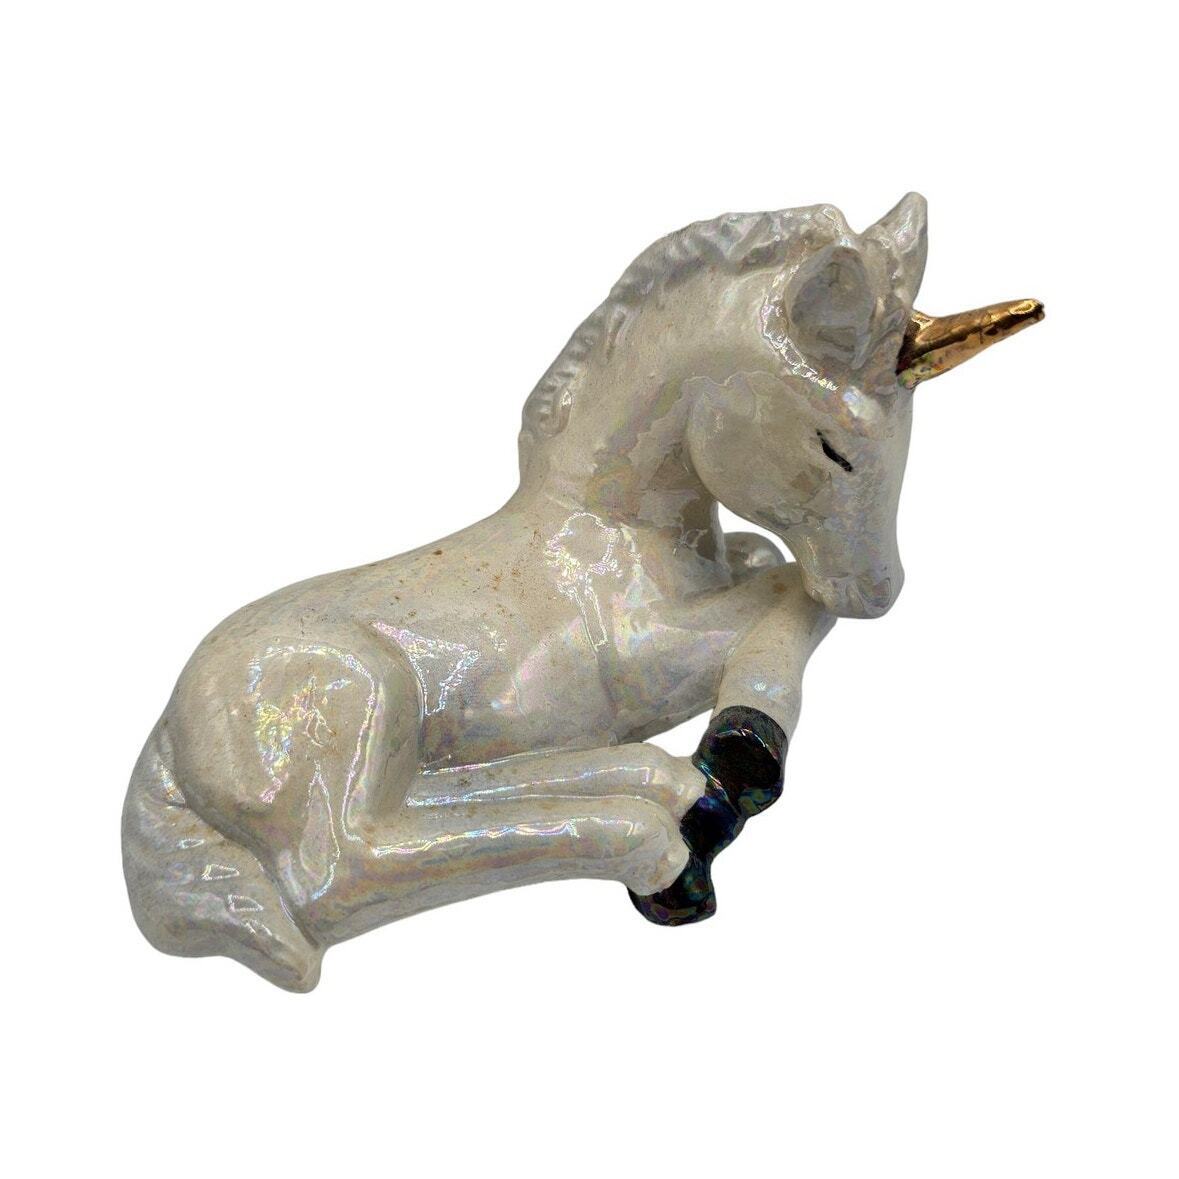 Vintage 1990s Pearlized Unicorn Figurine Ceramic Laying Down Gold Horn